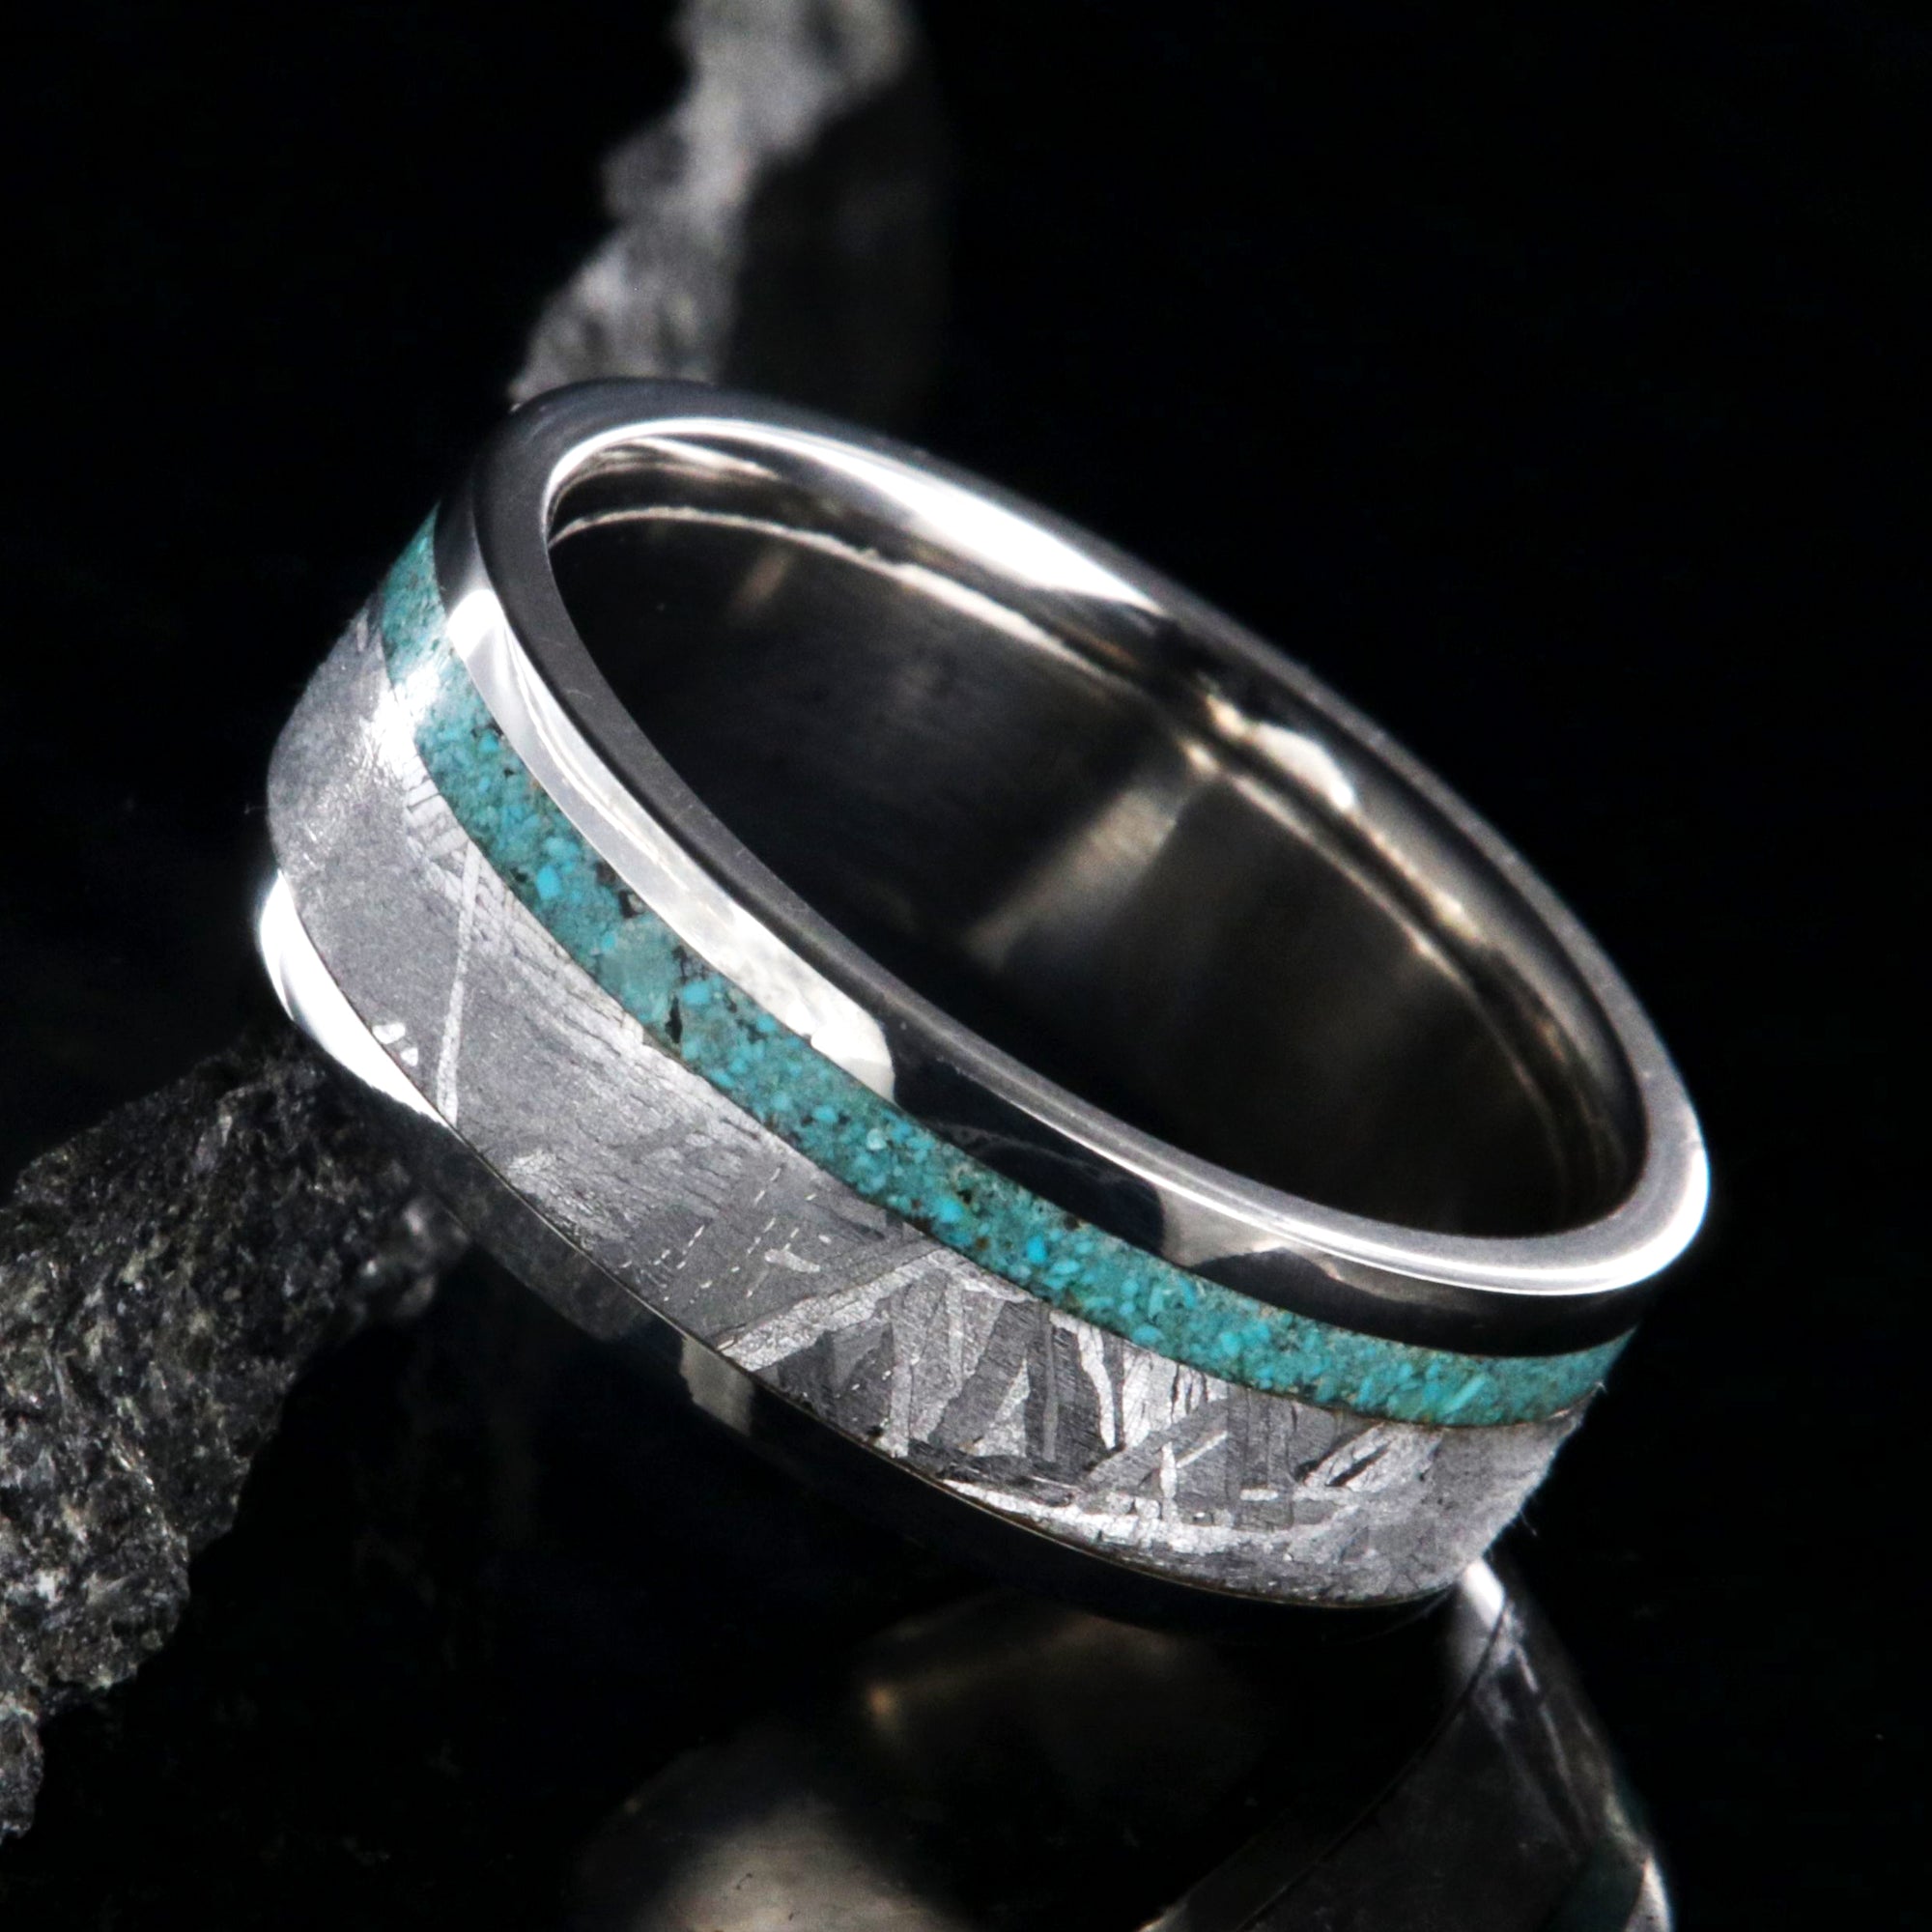 7mm wide cobalt ring with meteorite and a thin turquoise edge inlay